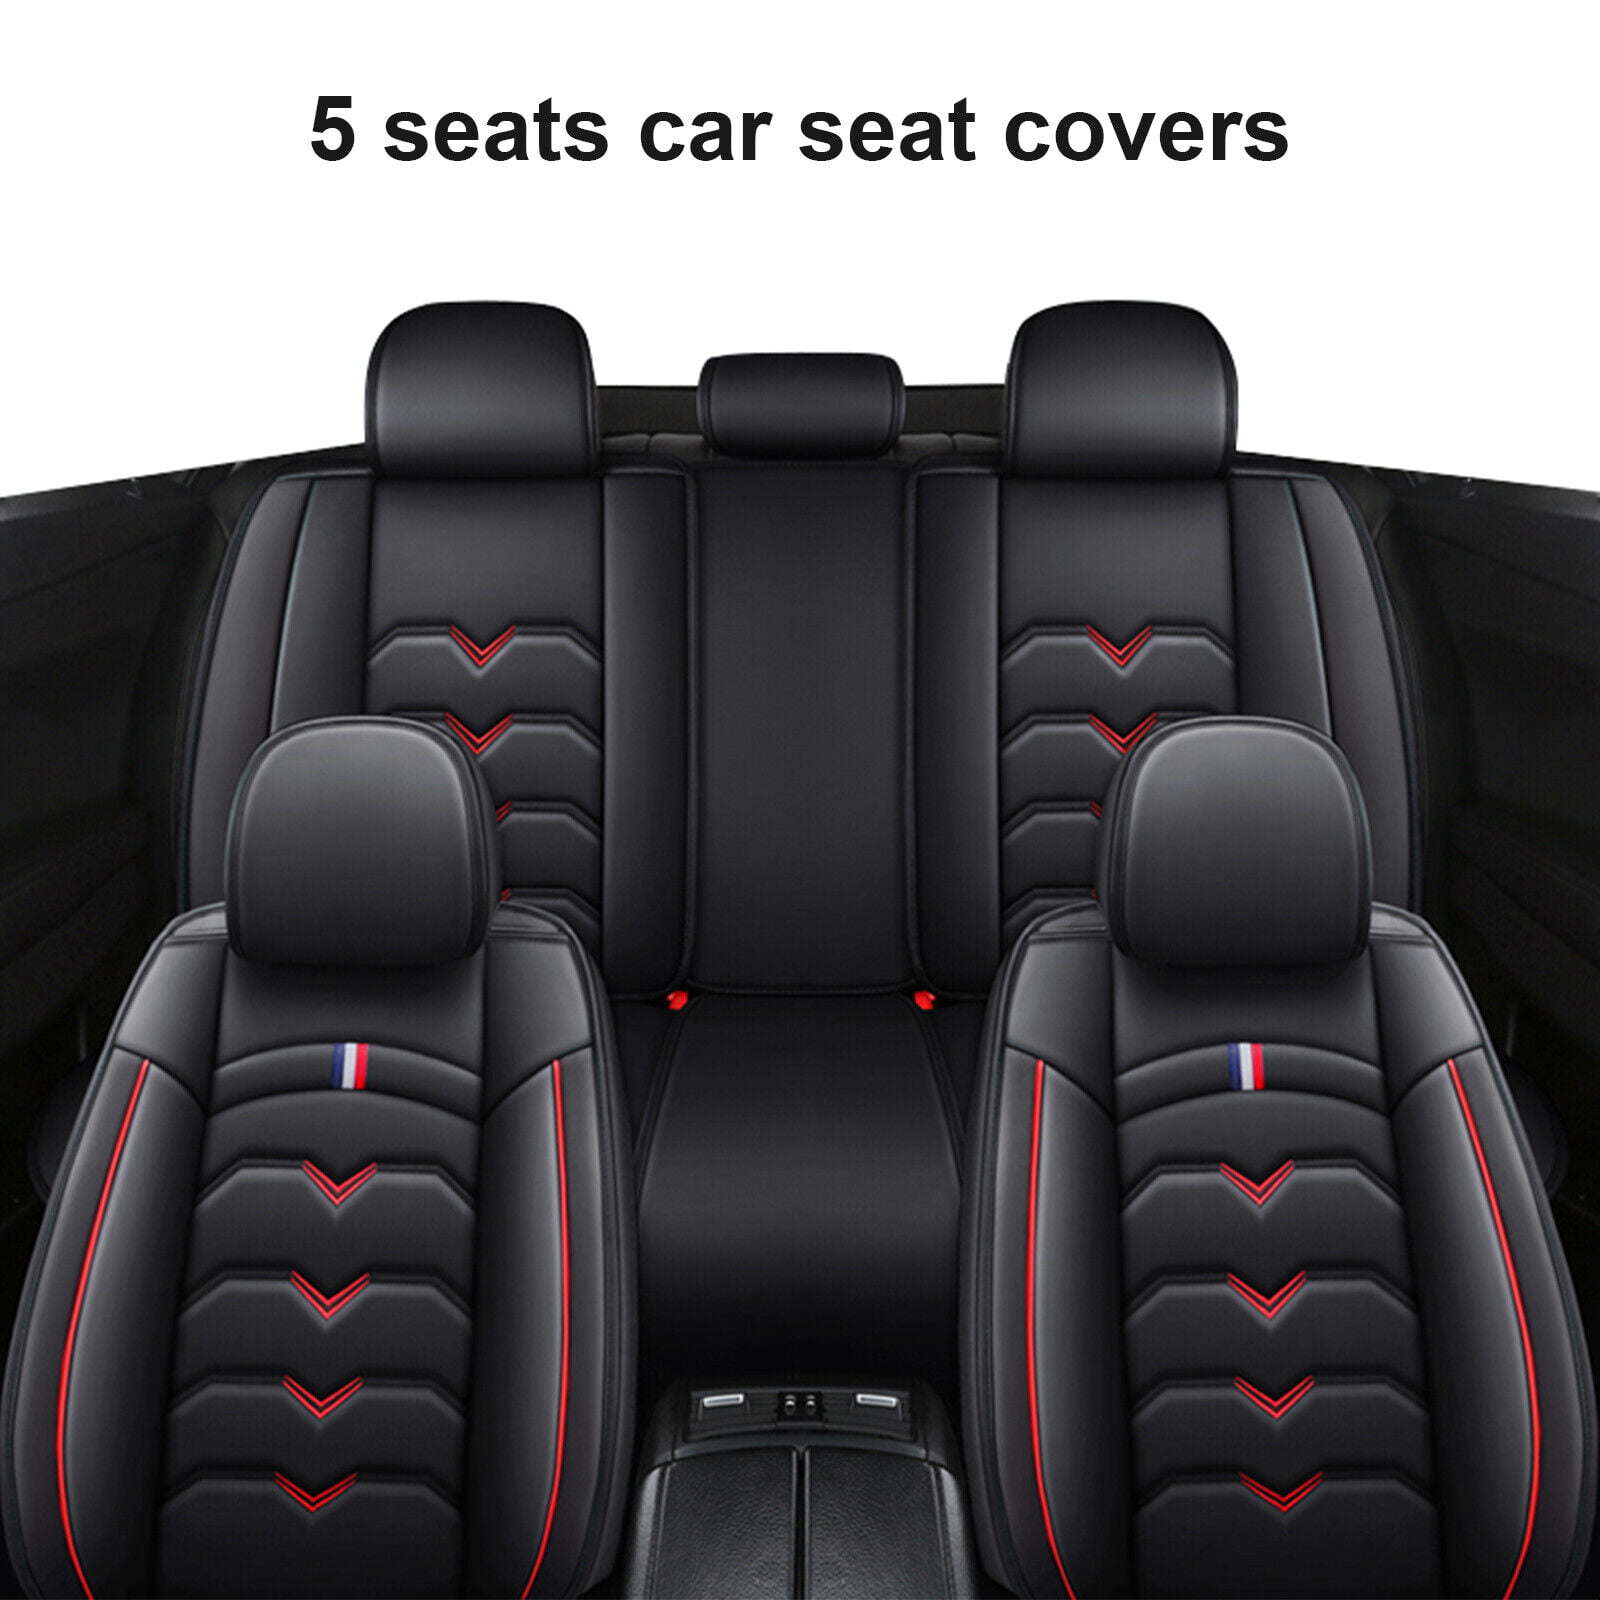 Car Seat Covers for Honda CR-V Civic Insight Accord Crosstour, Premium  Leather Cushion Protector, 5 Seats Front Rear Full Set Black+Pink 